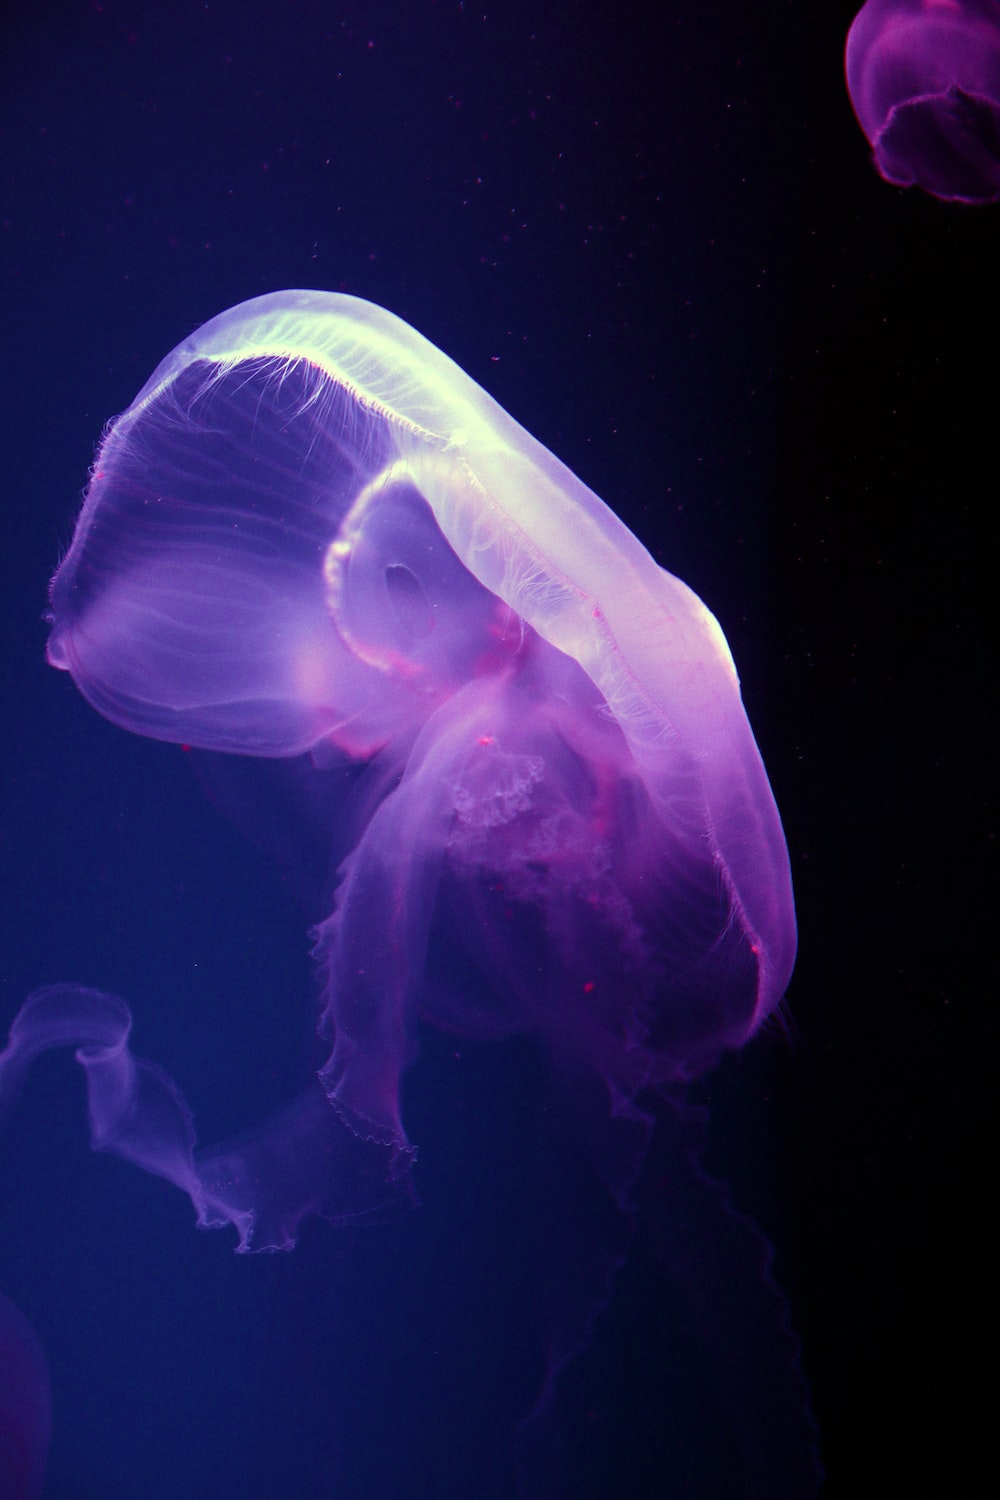 Moon Jellyfish Picture. Download Free Image